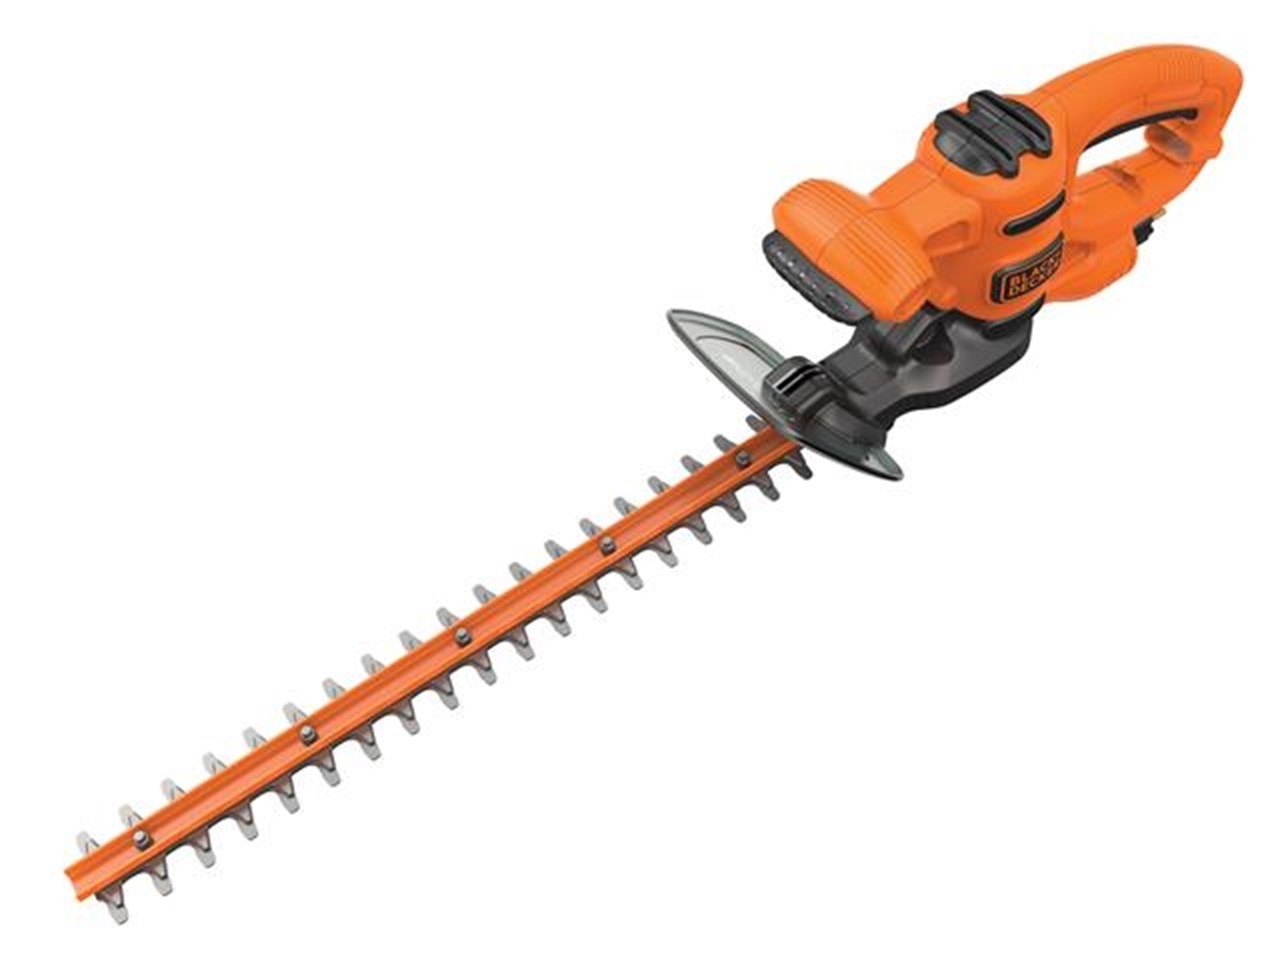 remington hedge wizard pro electric hedge trimmer